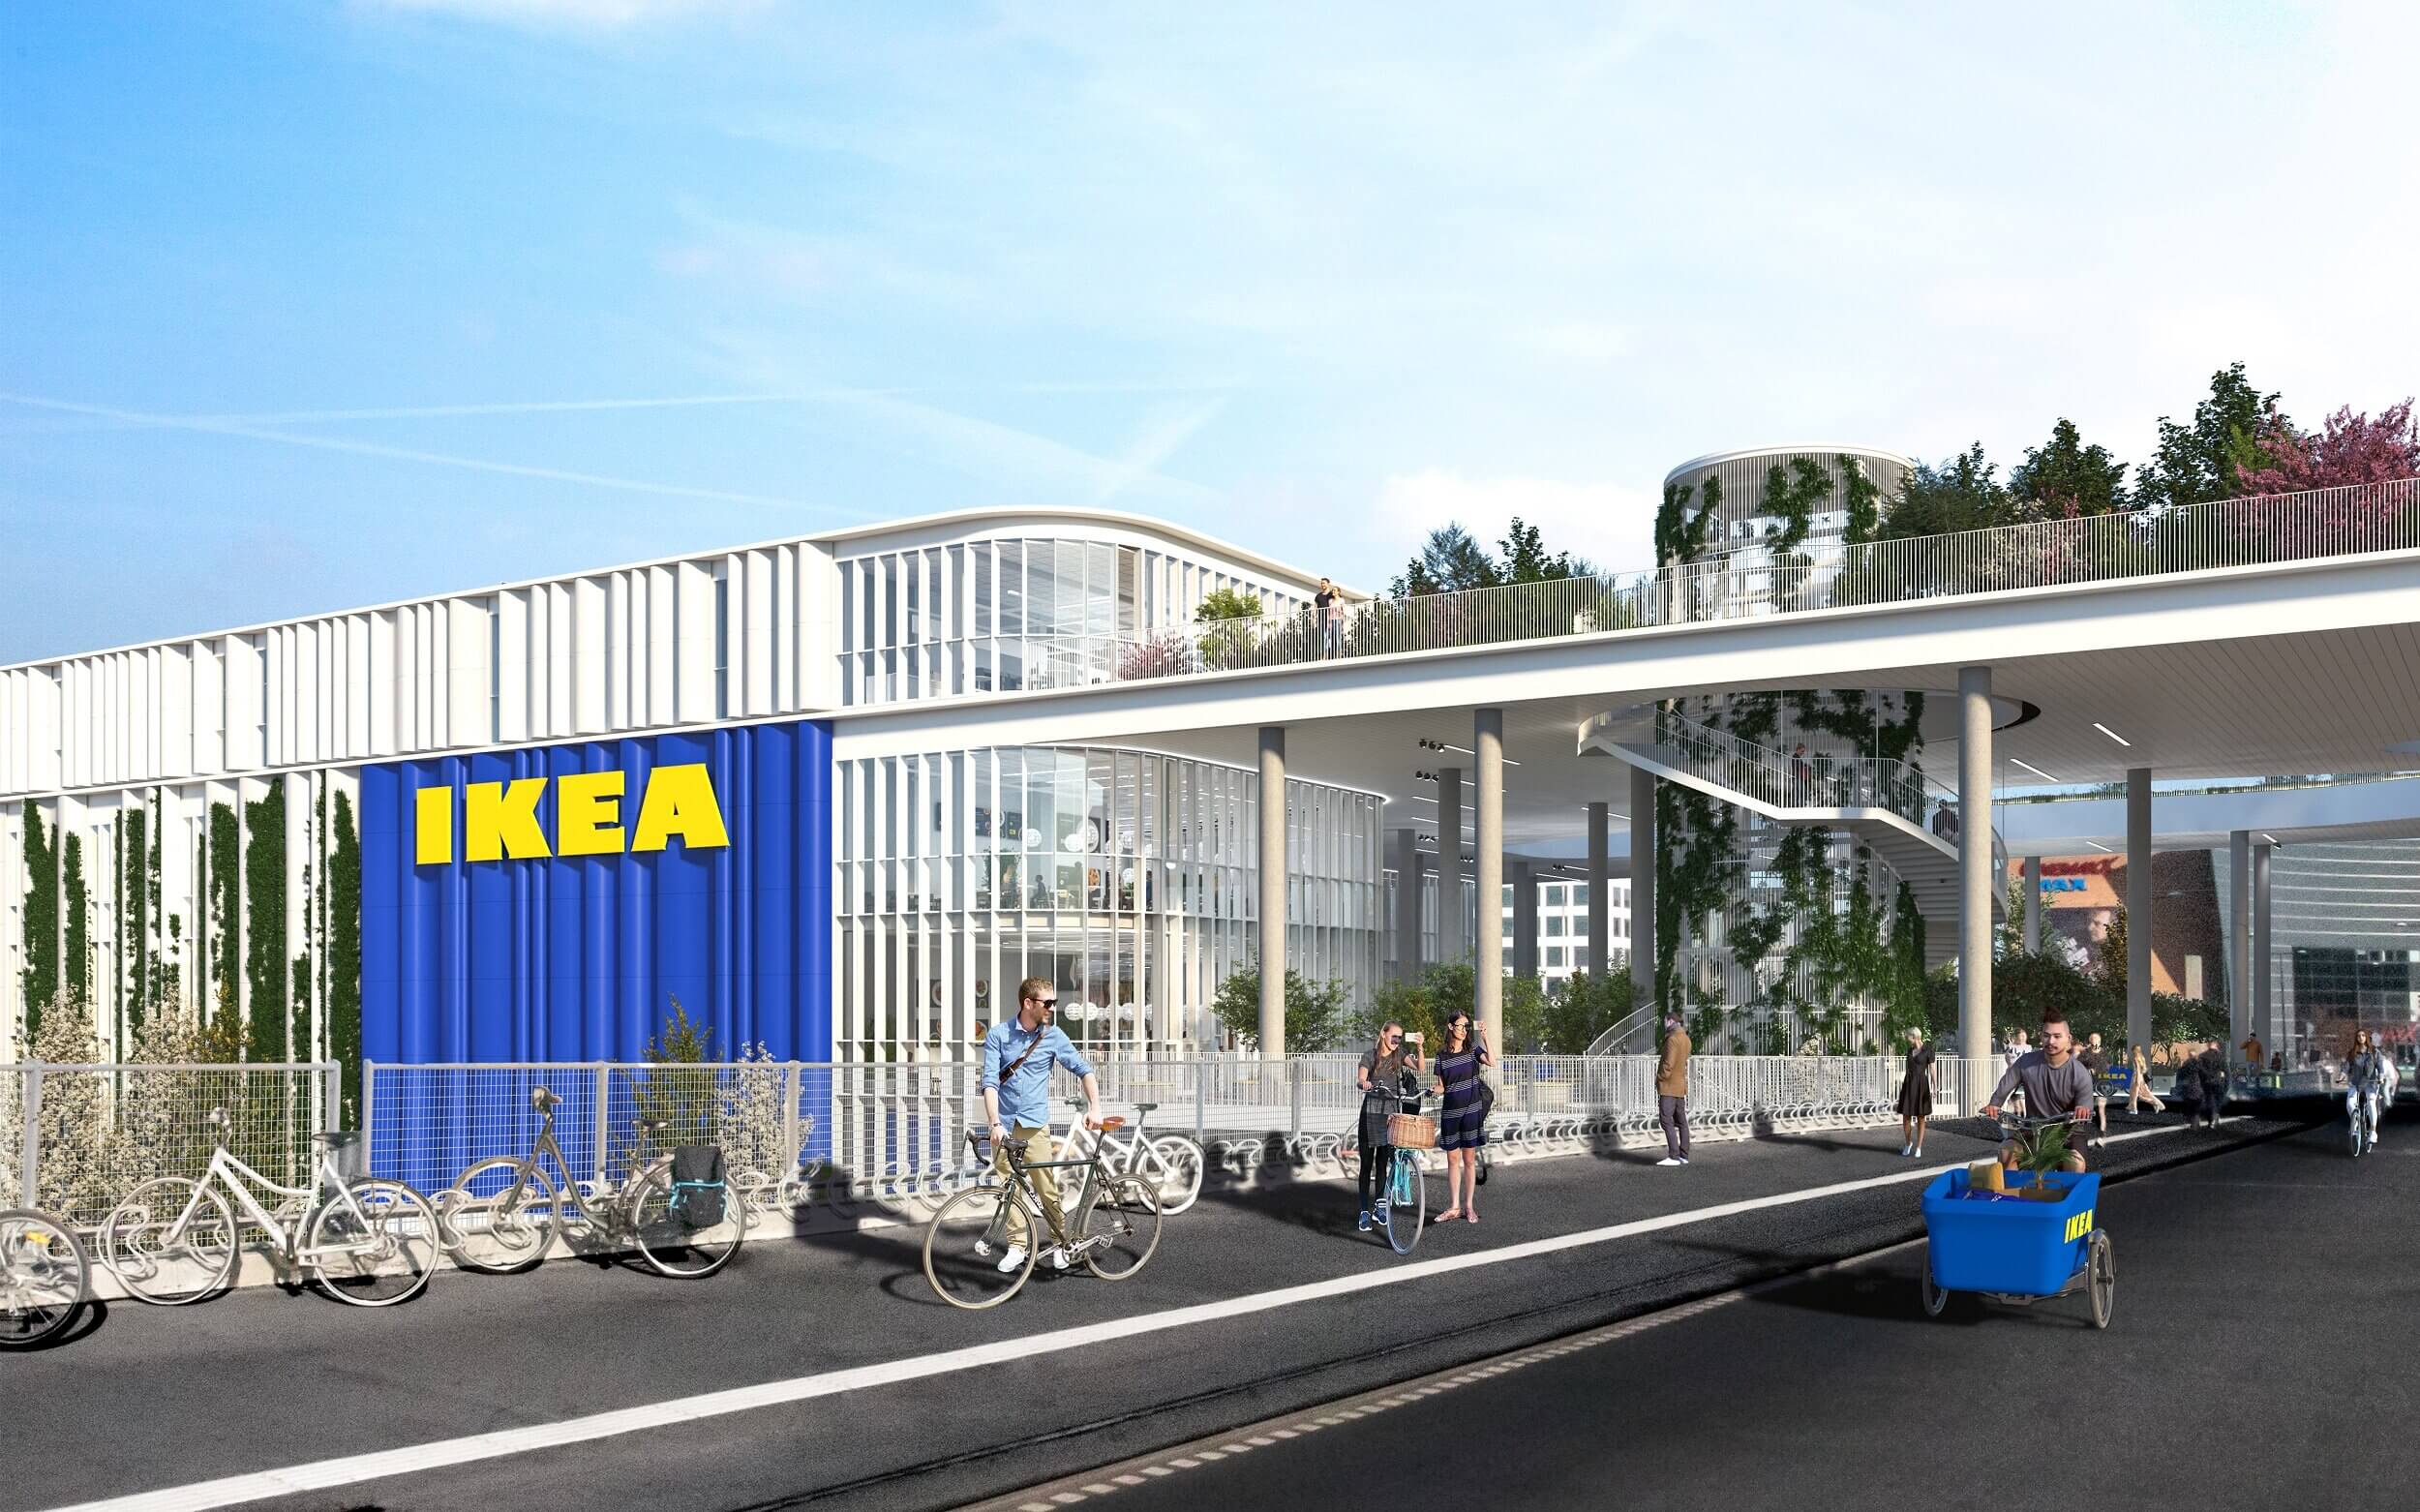 rendering of pedestrians and cyclists arriving at an ikea store